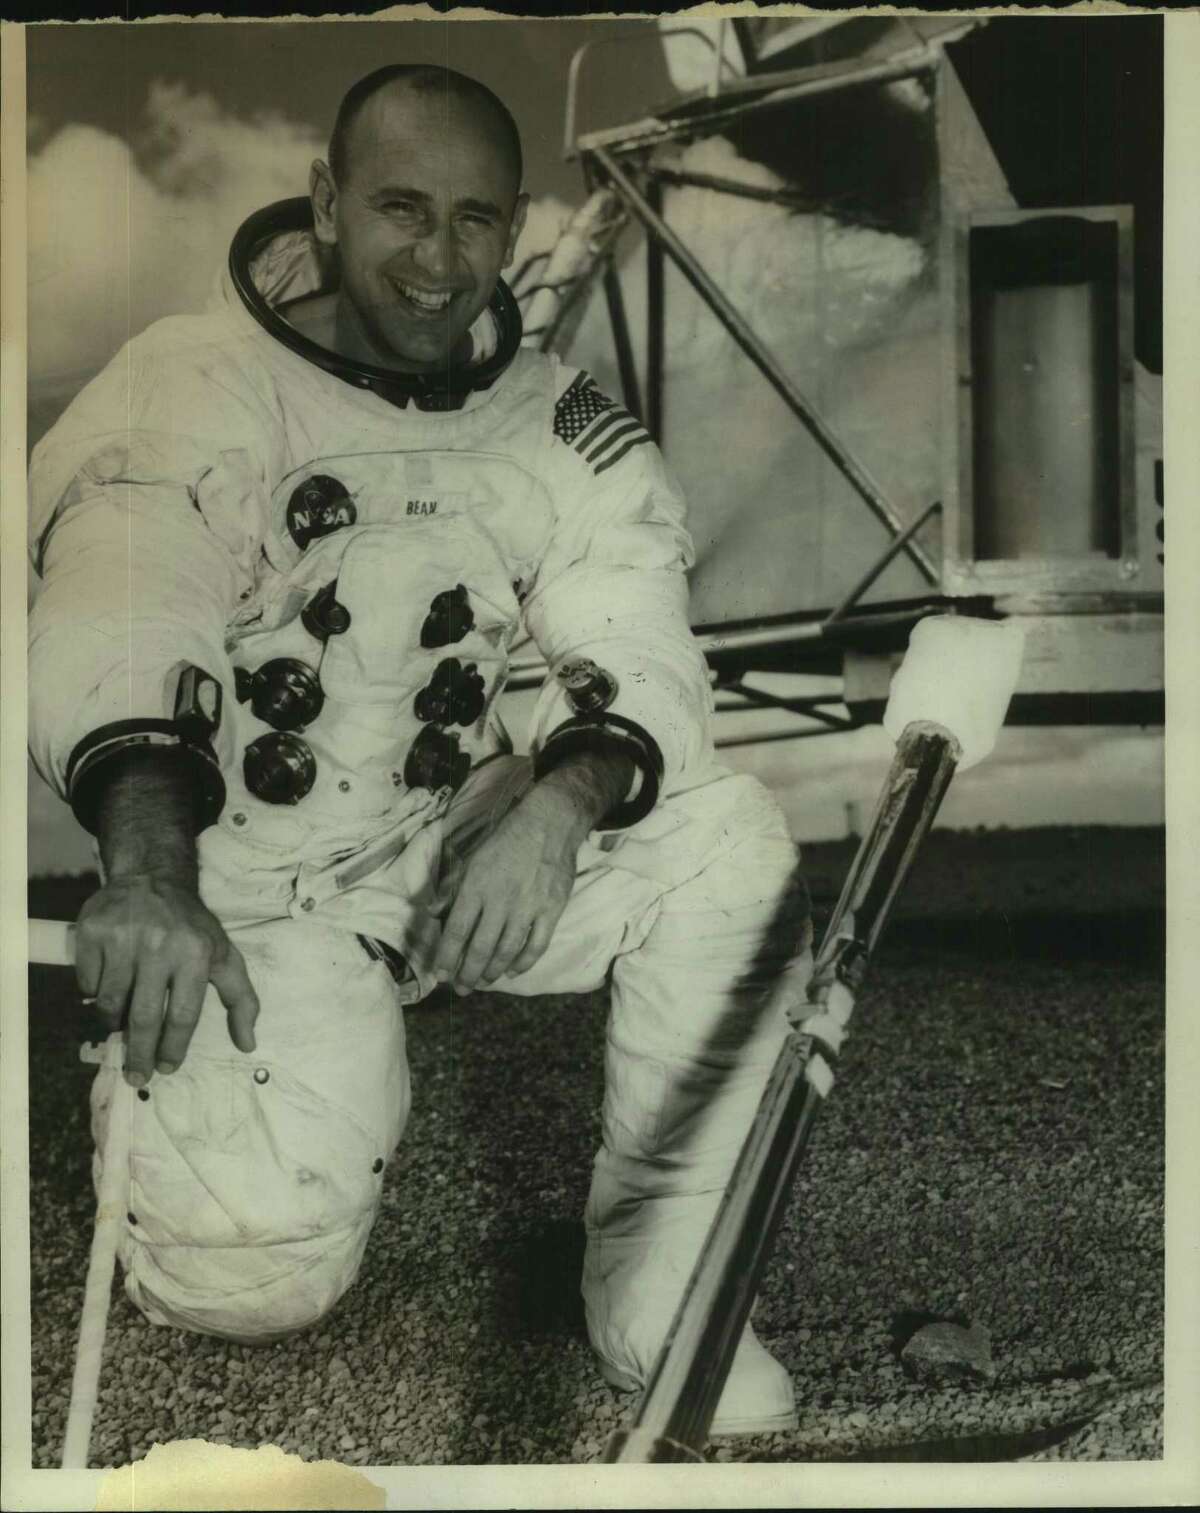 A 1973 Press Photo Astronaut Alan Bean. Bean, 86, died on Saturday, May 26, 2018 at Houston Methodist Hospital in Houston. His death followed his suddenly falling ill while on travel in Fort Wayne, Indiana two weeks before.